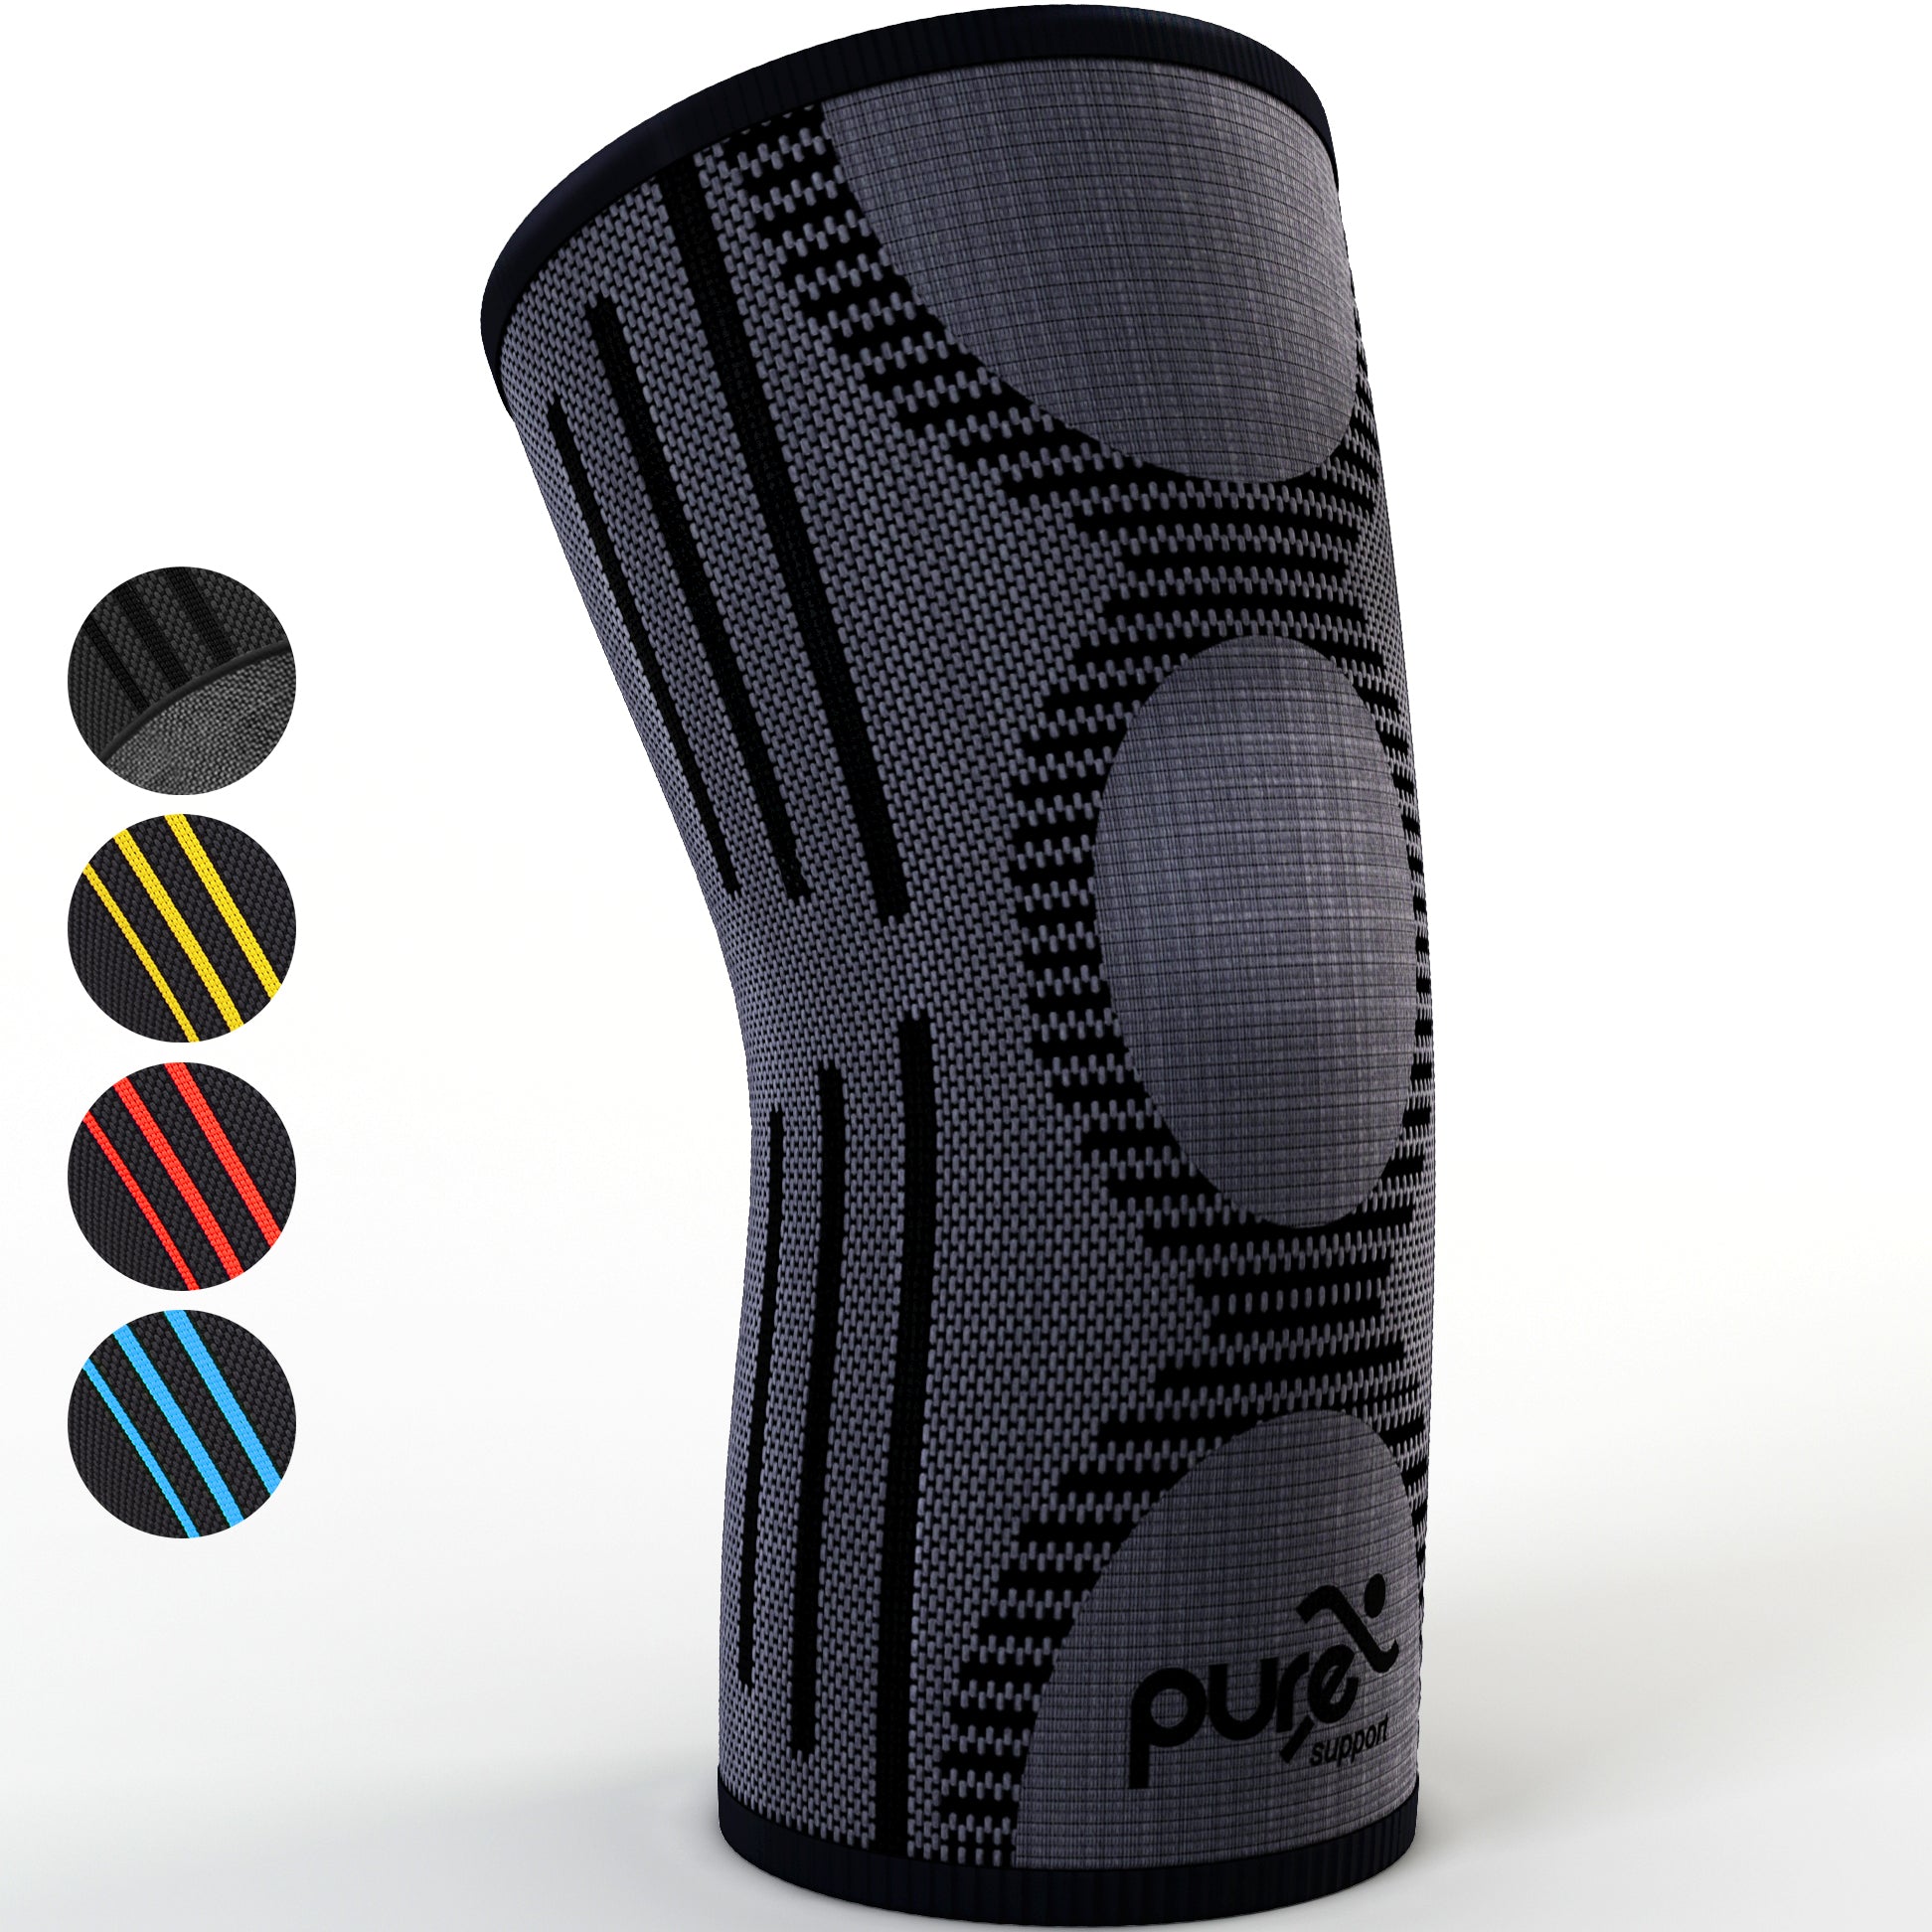 Knee Support REG-100 (Black) - Pure Support